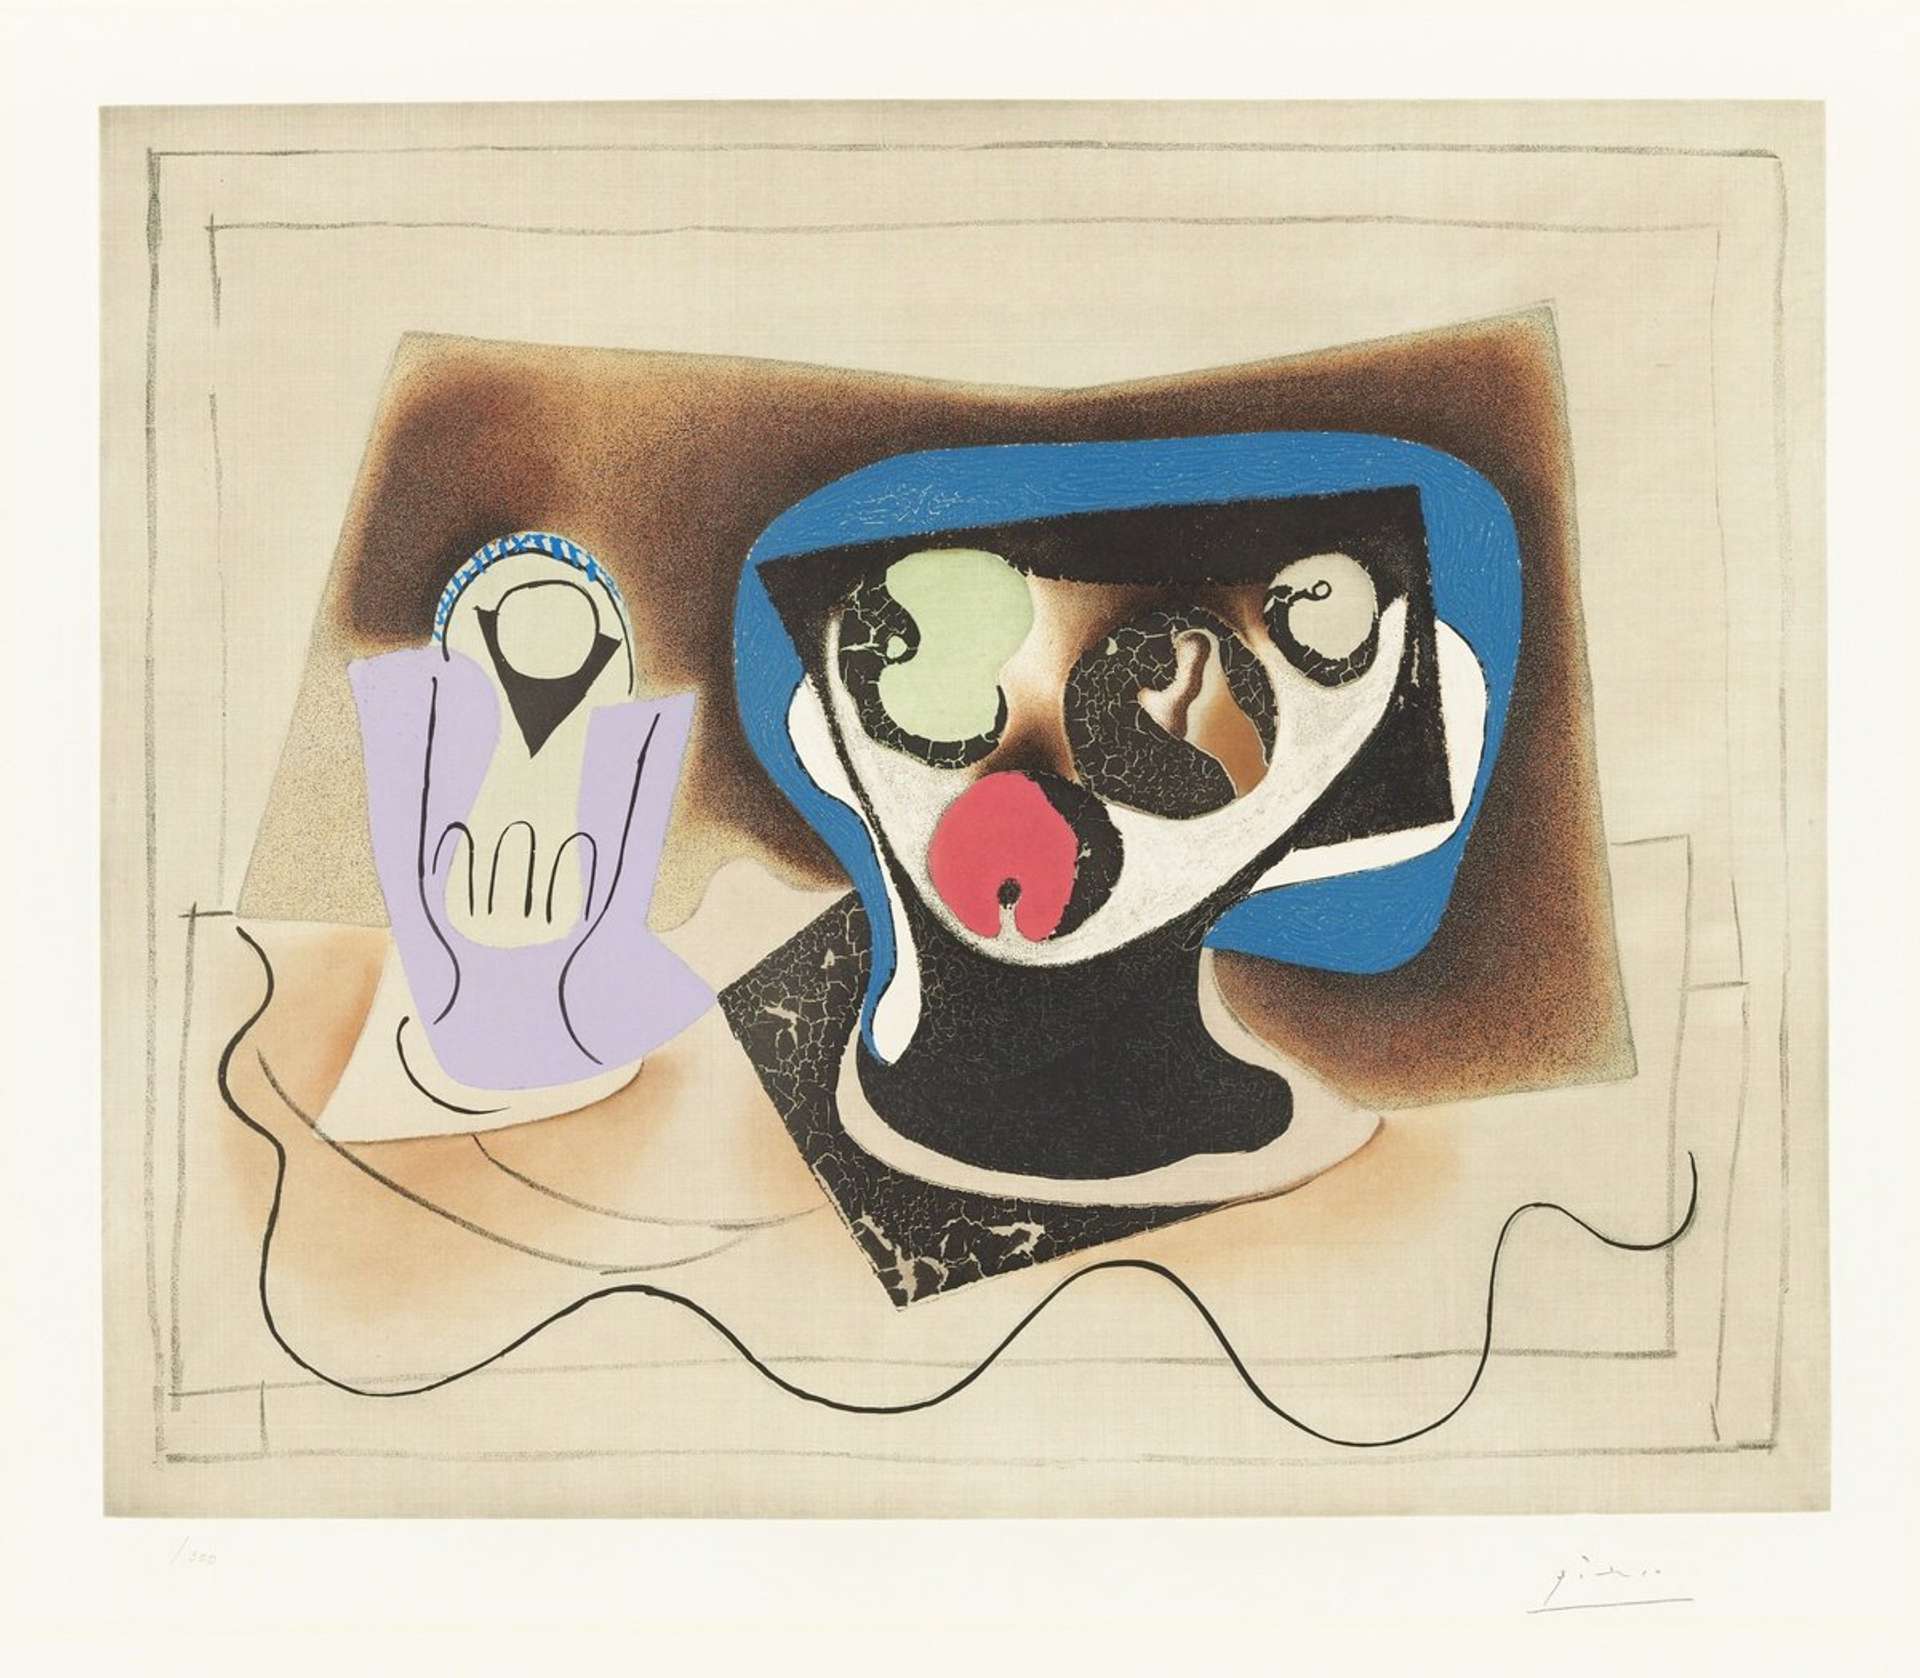 A Buyer's Guide to Pablo Picasso Prints